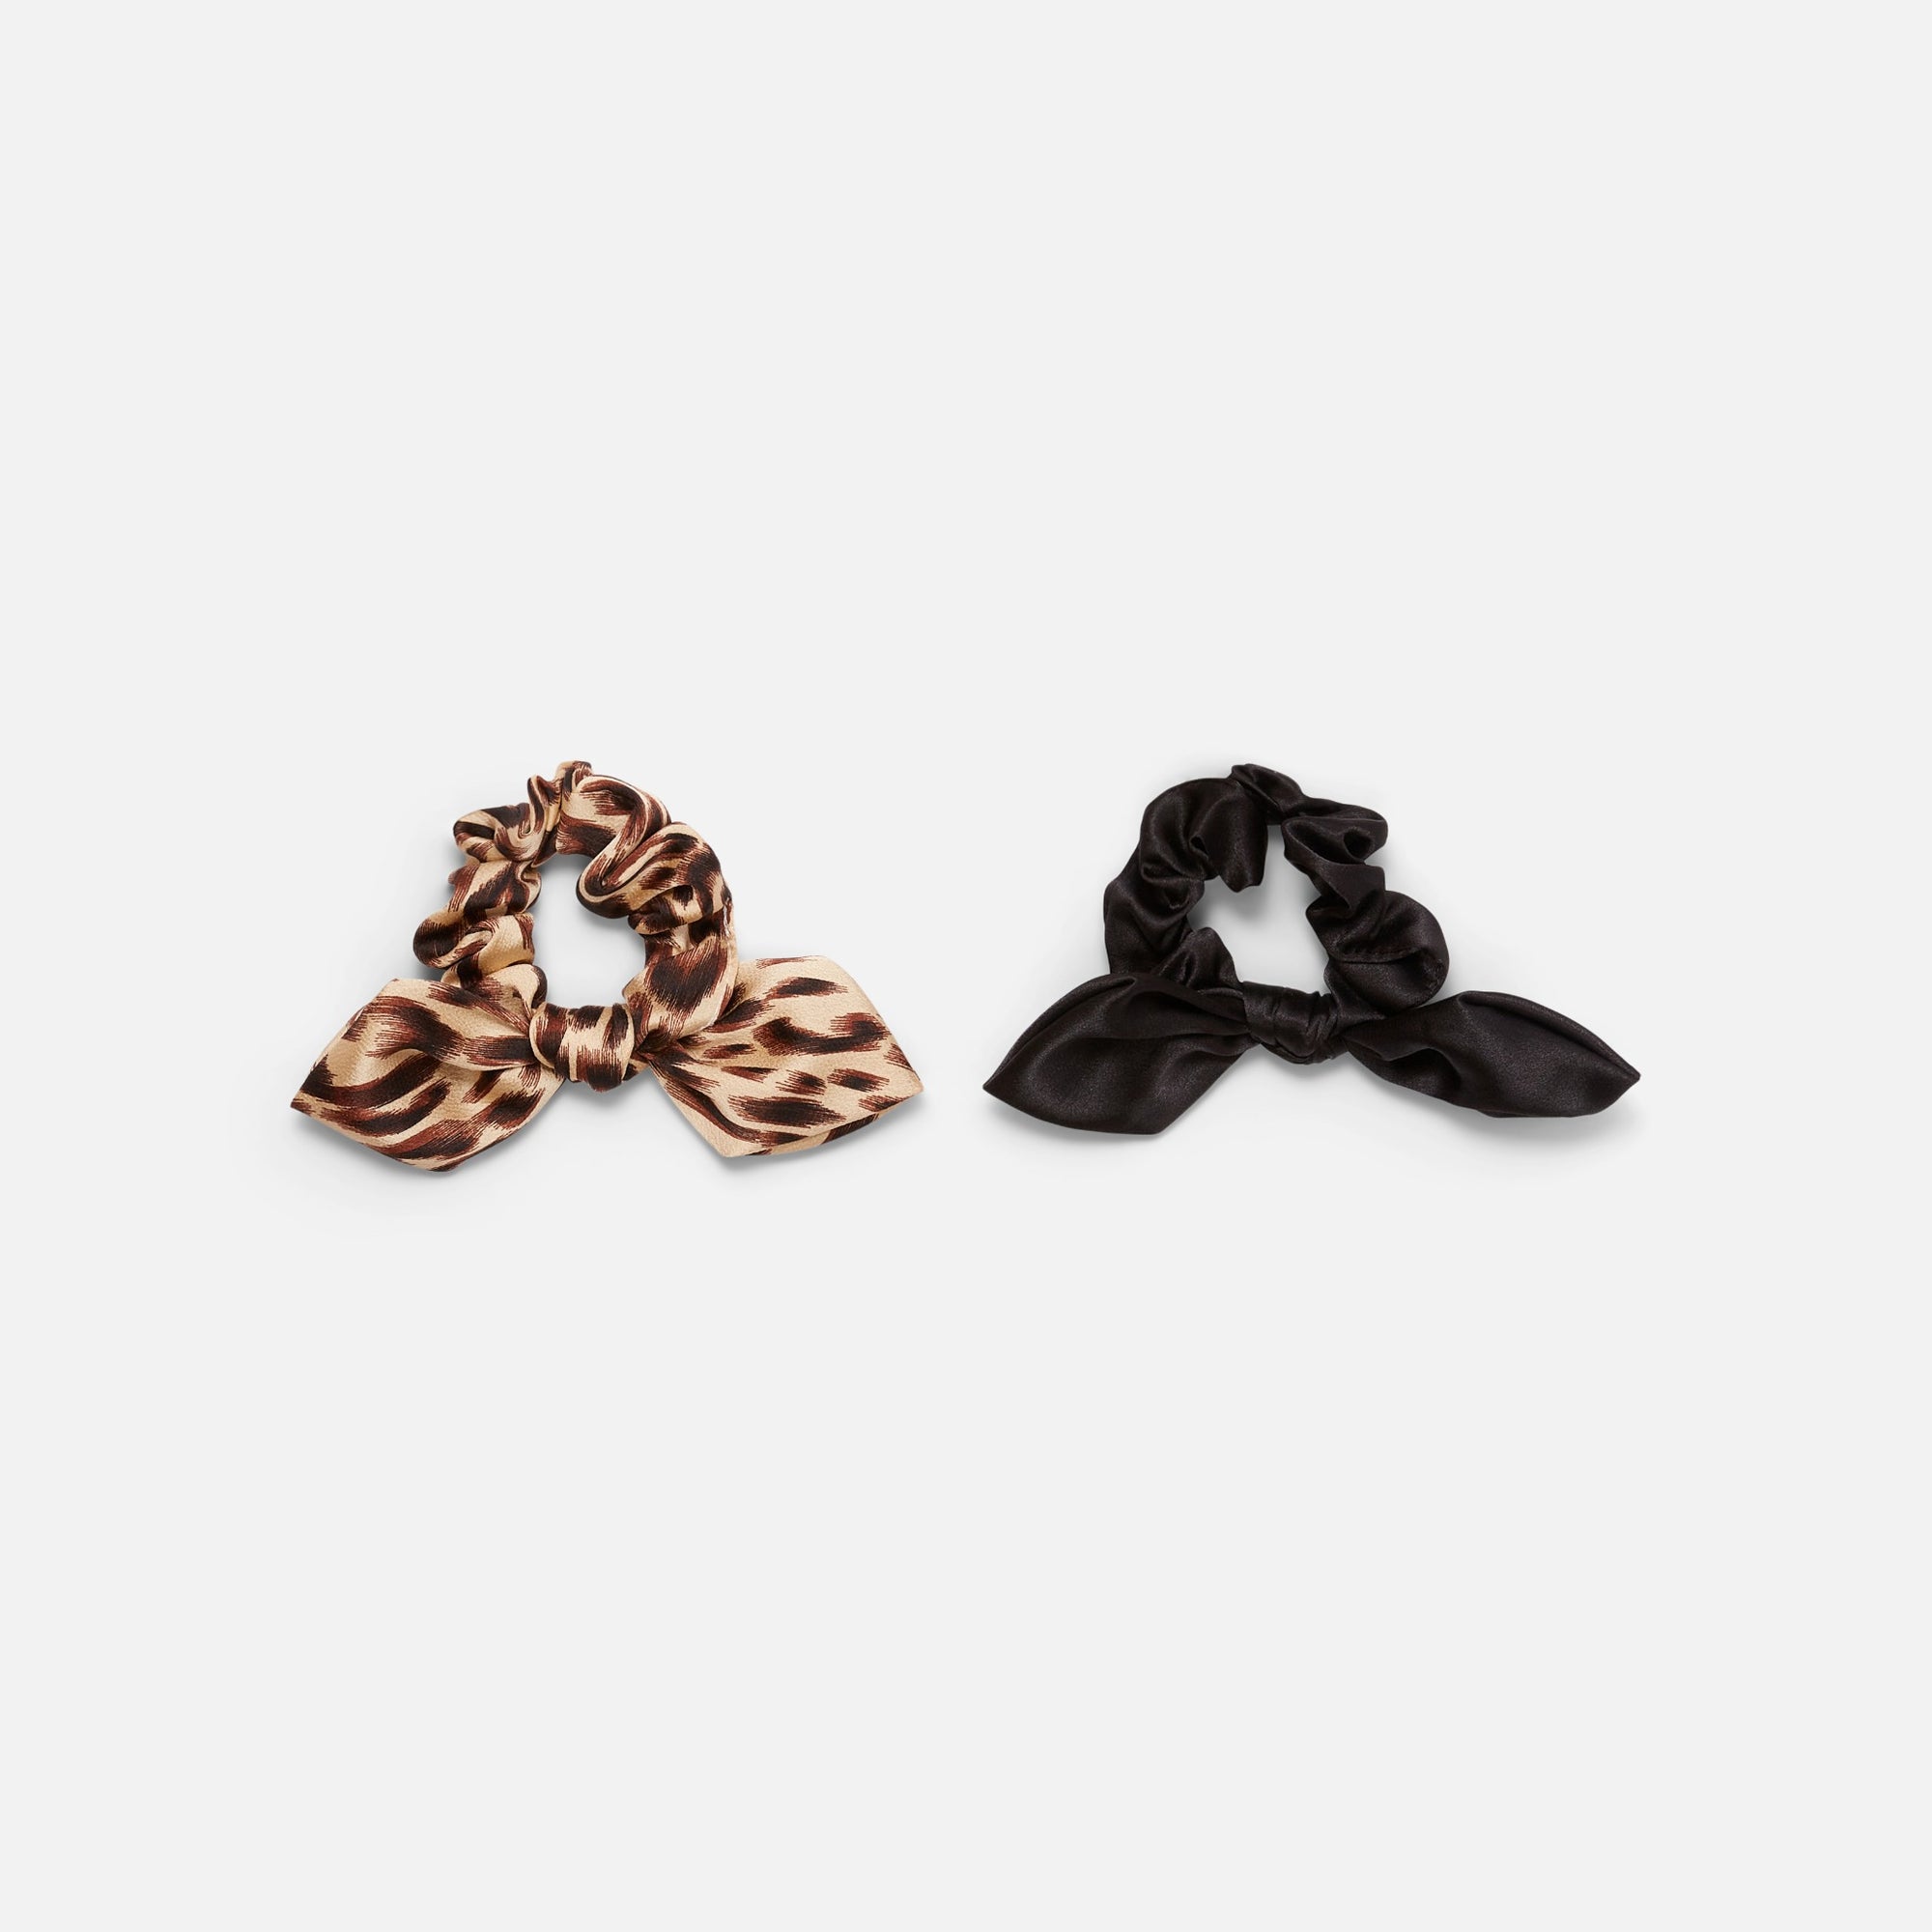 Set of 2 scrunchies in black and animal print with bows